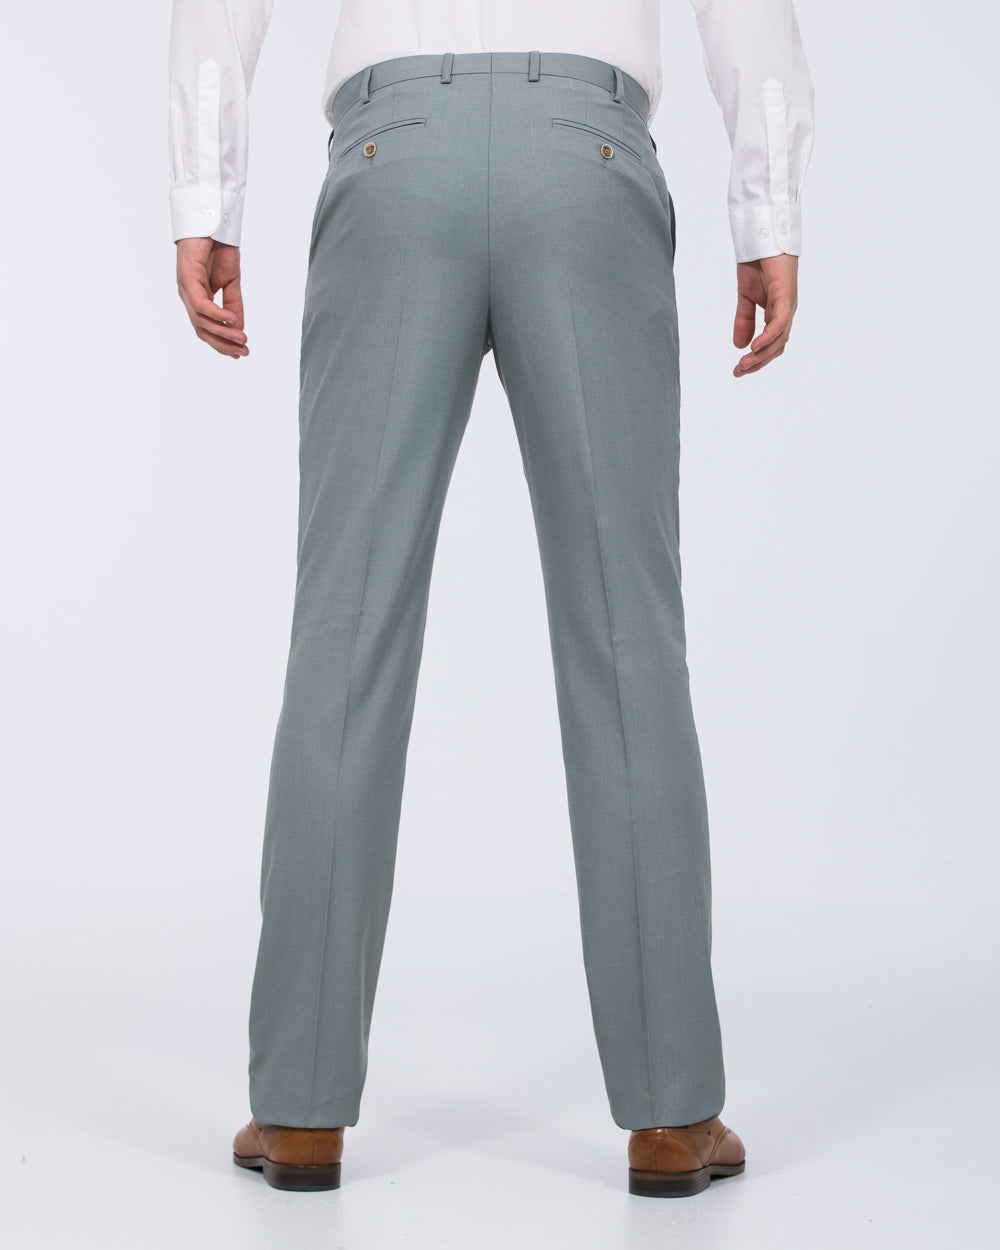 Skopes Sultano Slim Fit Tall Suit (mint)